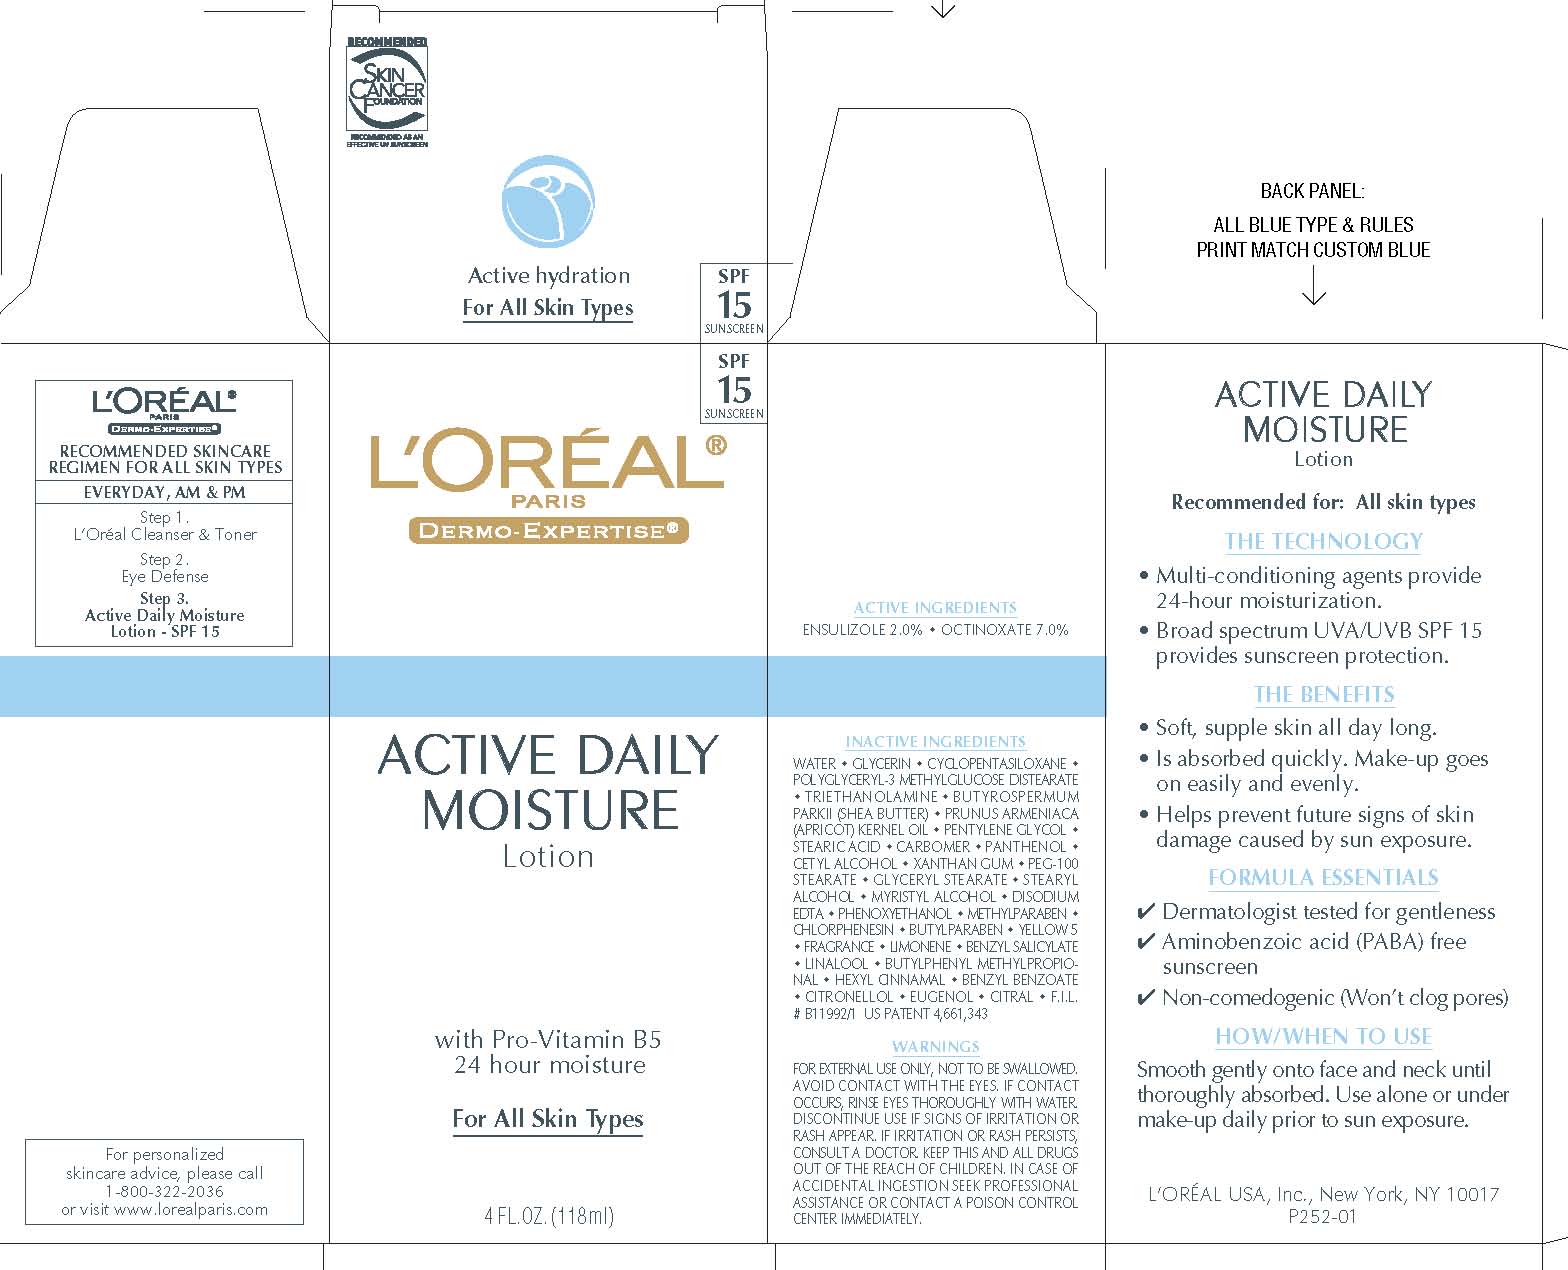 Loreal Paris Dermo Expertise Spf 15 Active Daily Moisture | Ensulizole And Octinoxate Lotion Breastfeeding